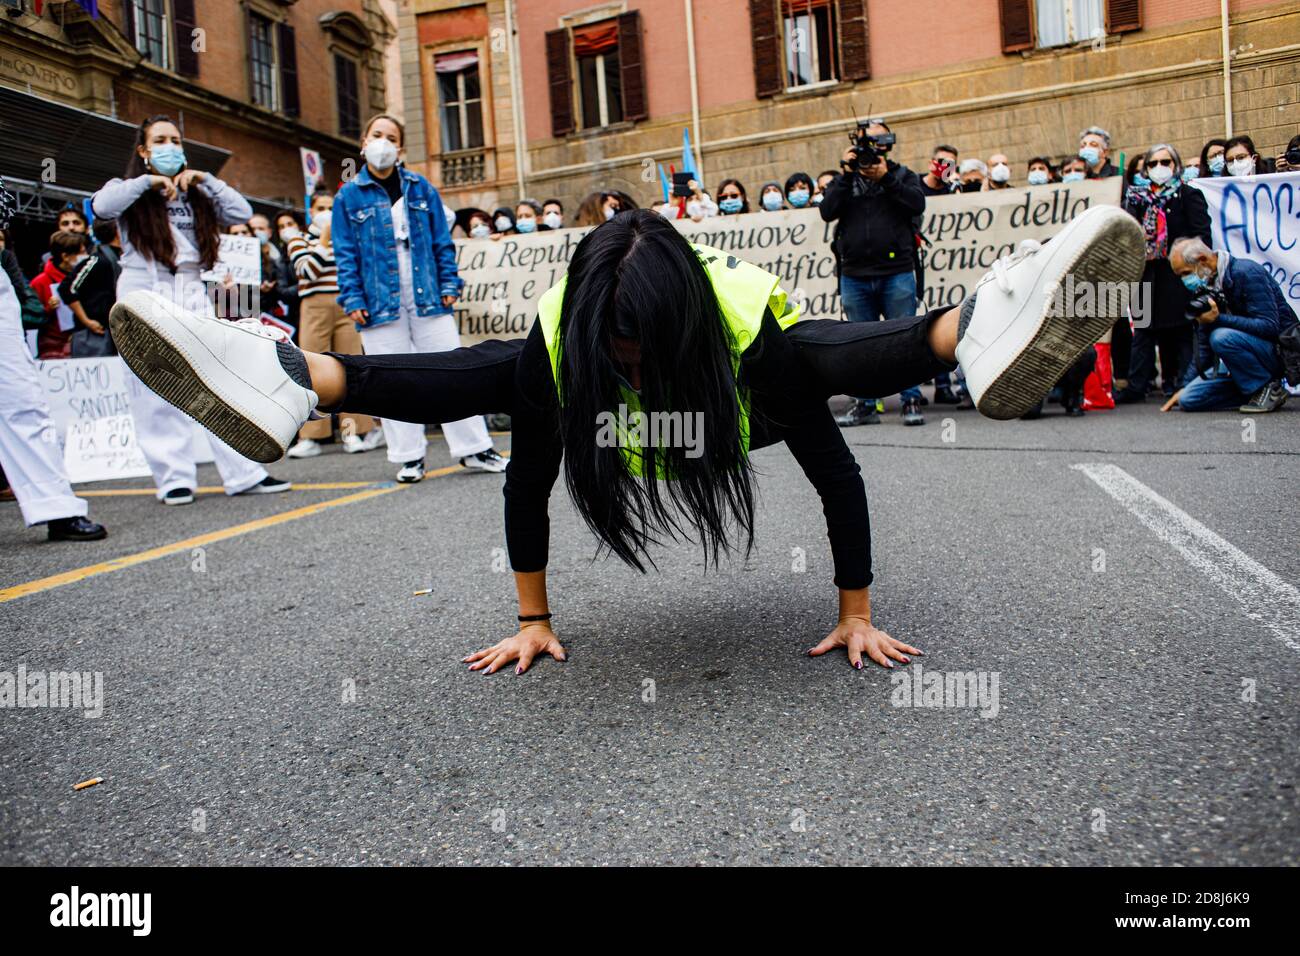 Bologna, Italy. 30th Oct, 2020. Theater workers, dancers and people working in the culture and entertainment sector attend a protest against the new lockdown measures for Covid-19 pandemic, on October 30, 2020 in Bologna, Italy. Credit: Massimiliano Donati/Alamy Live News Stock Photo